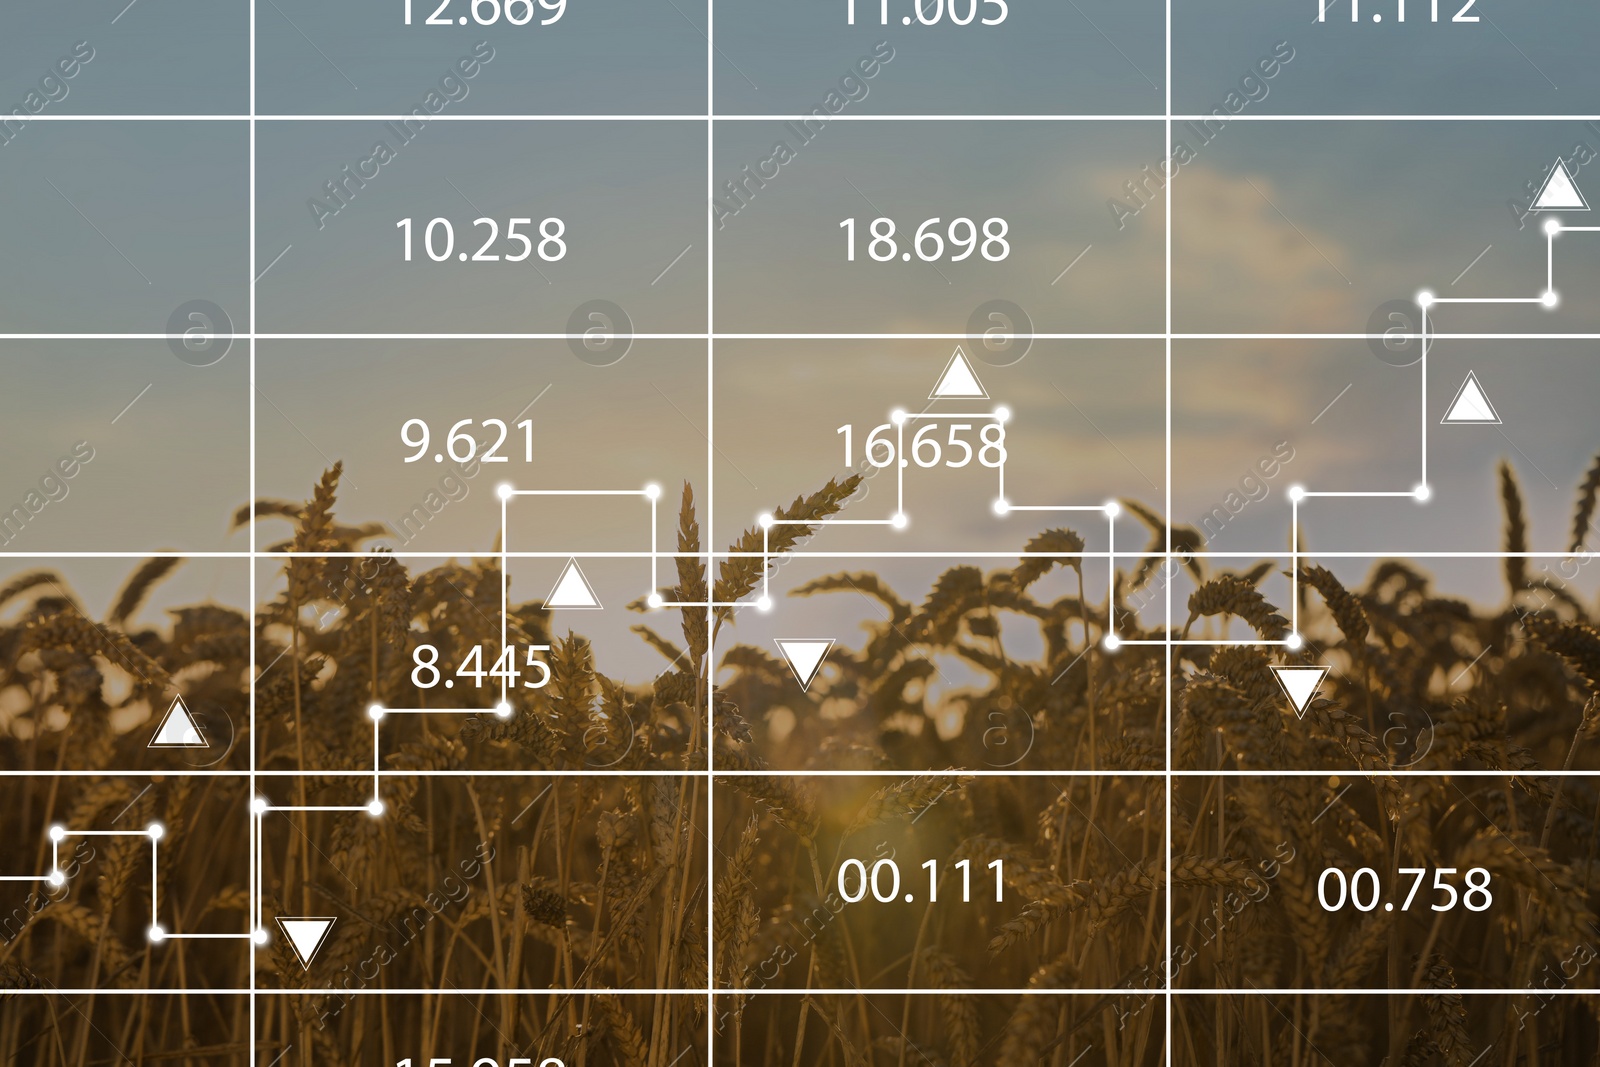 Image of Grain prices. Wheat field and graph, double exposure